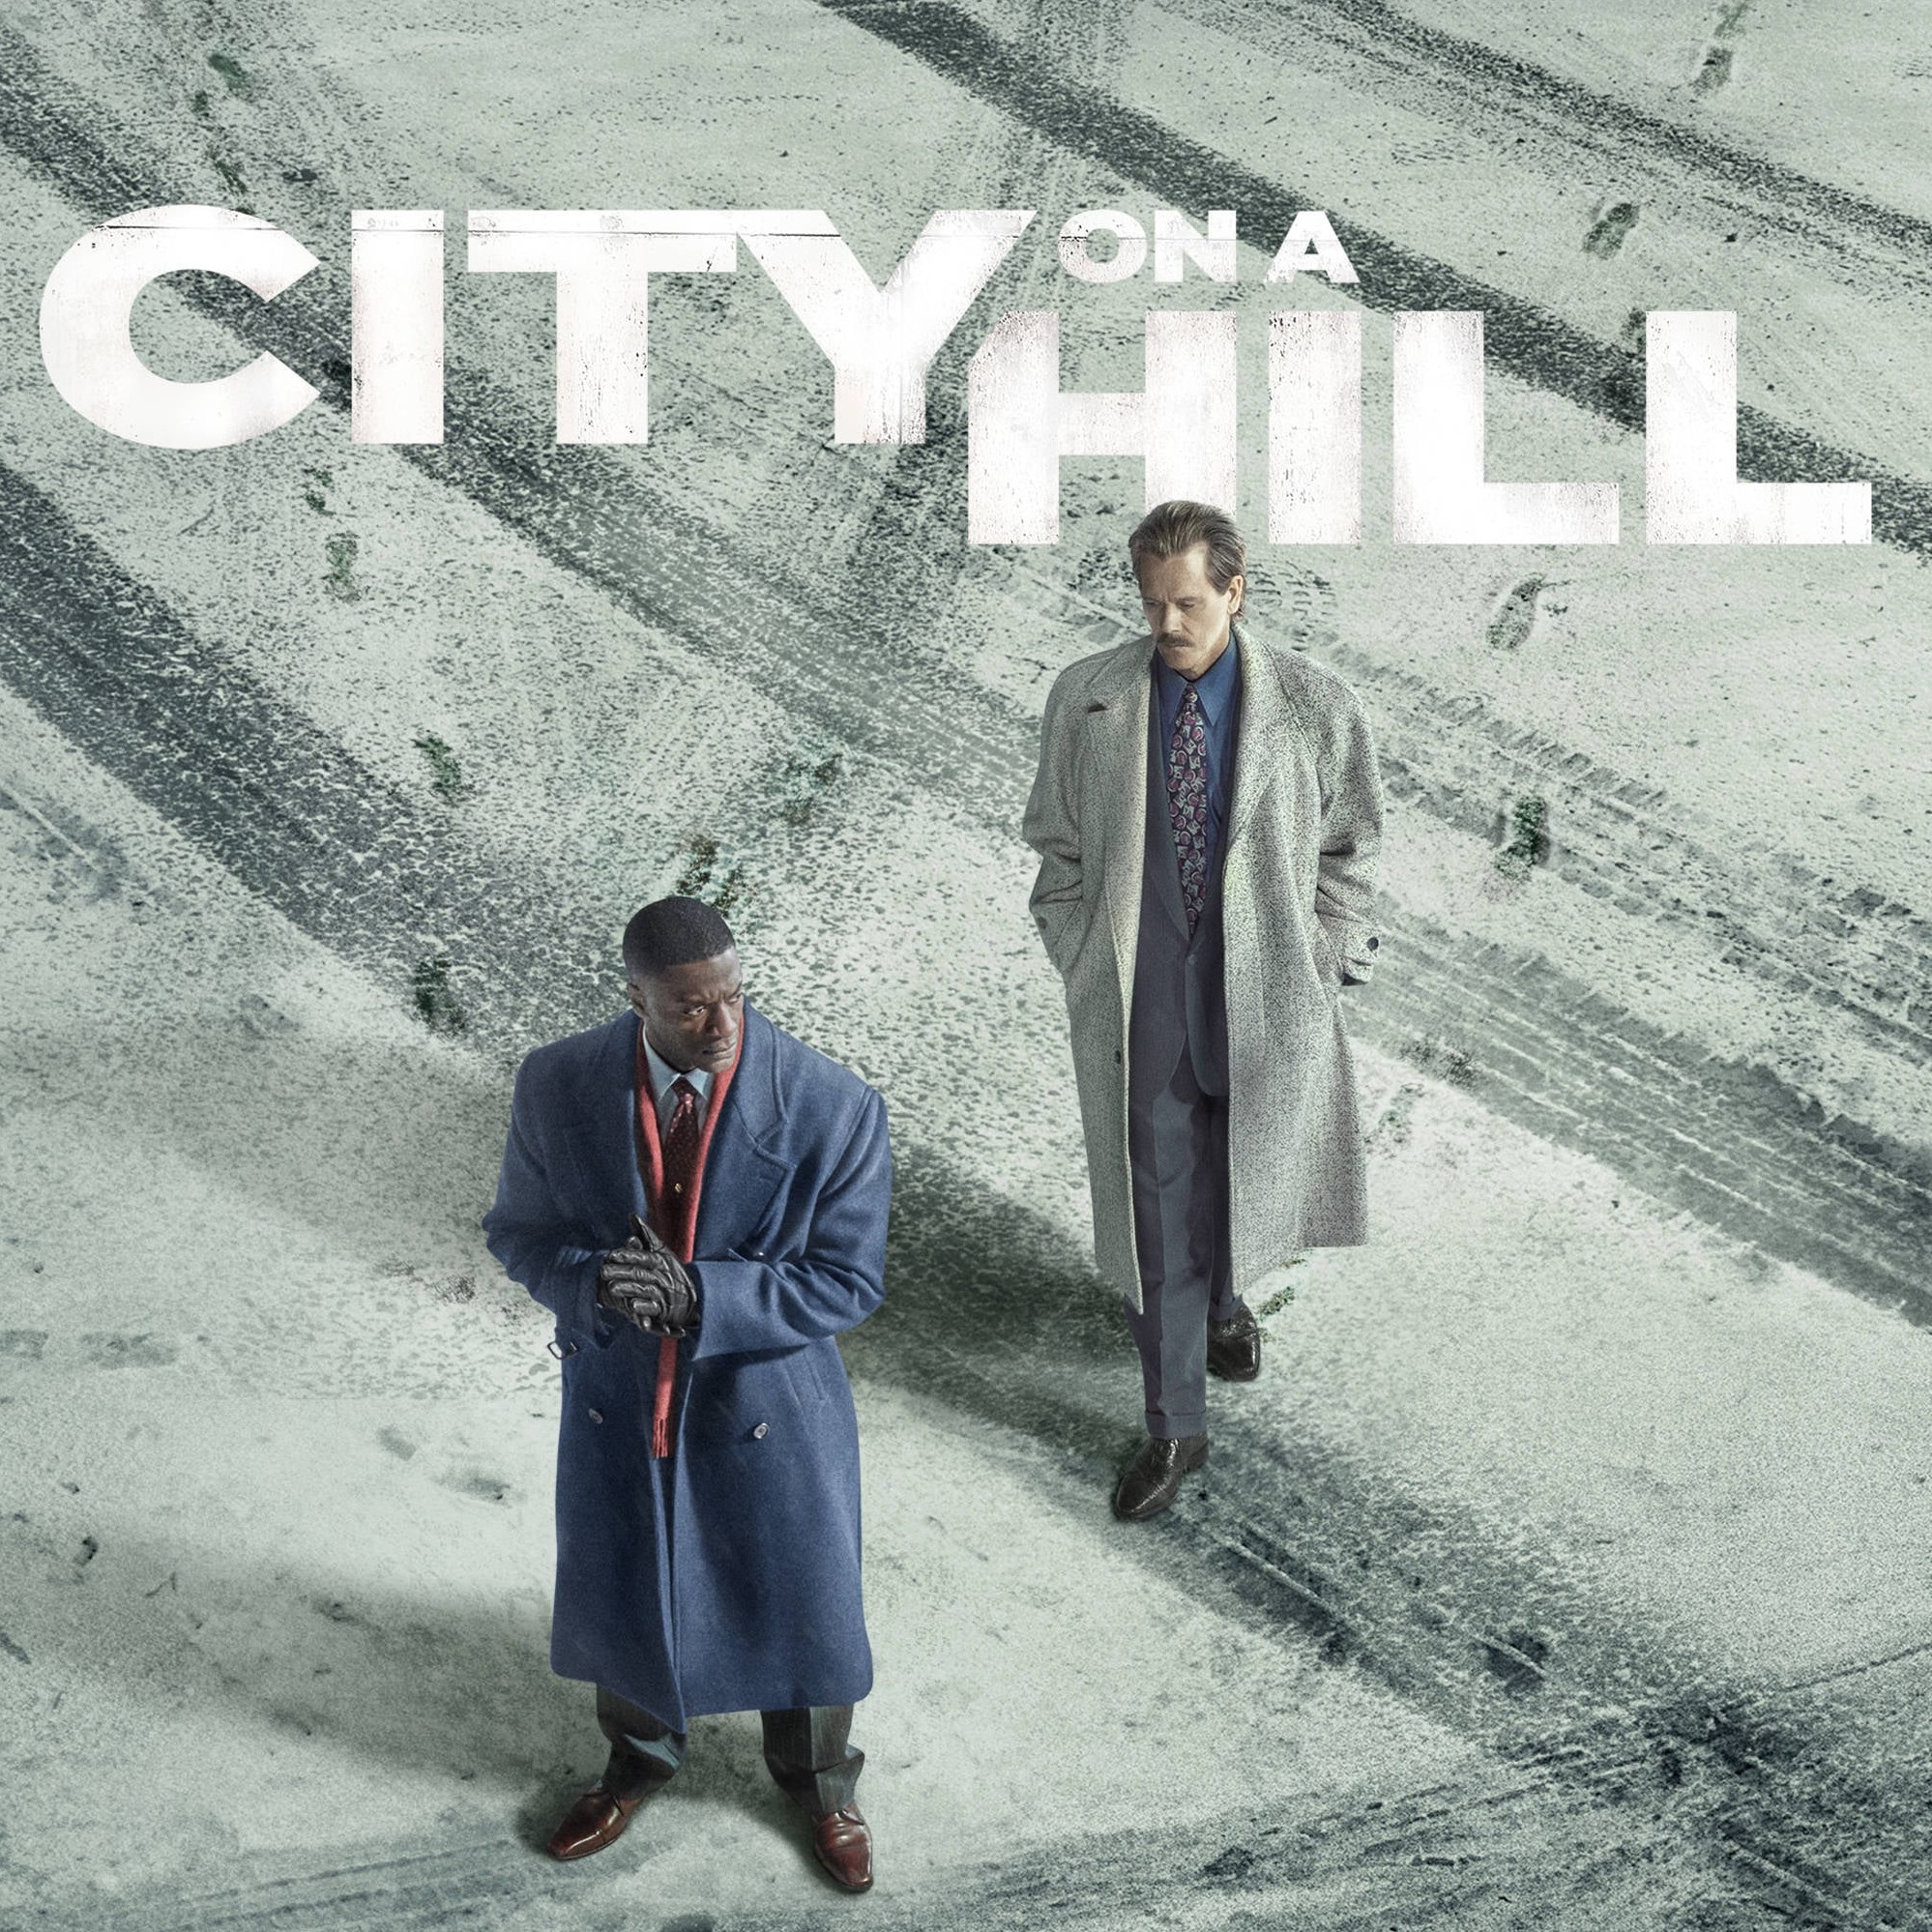 City on a Hill television series